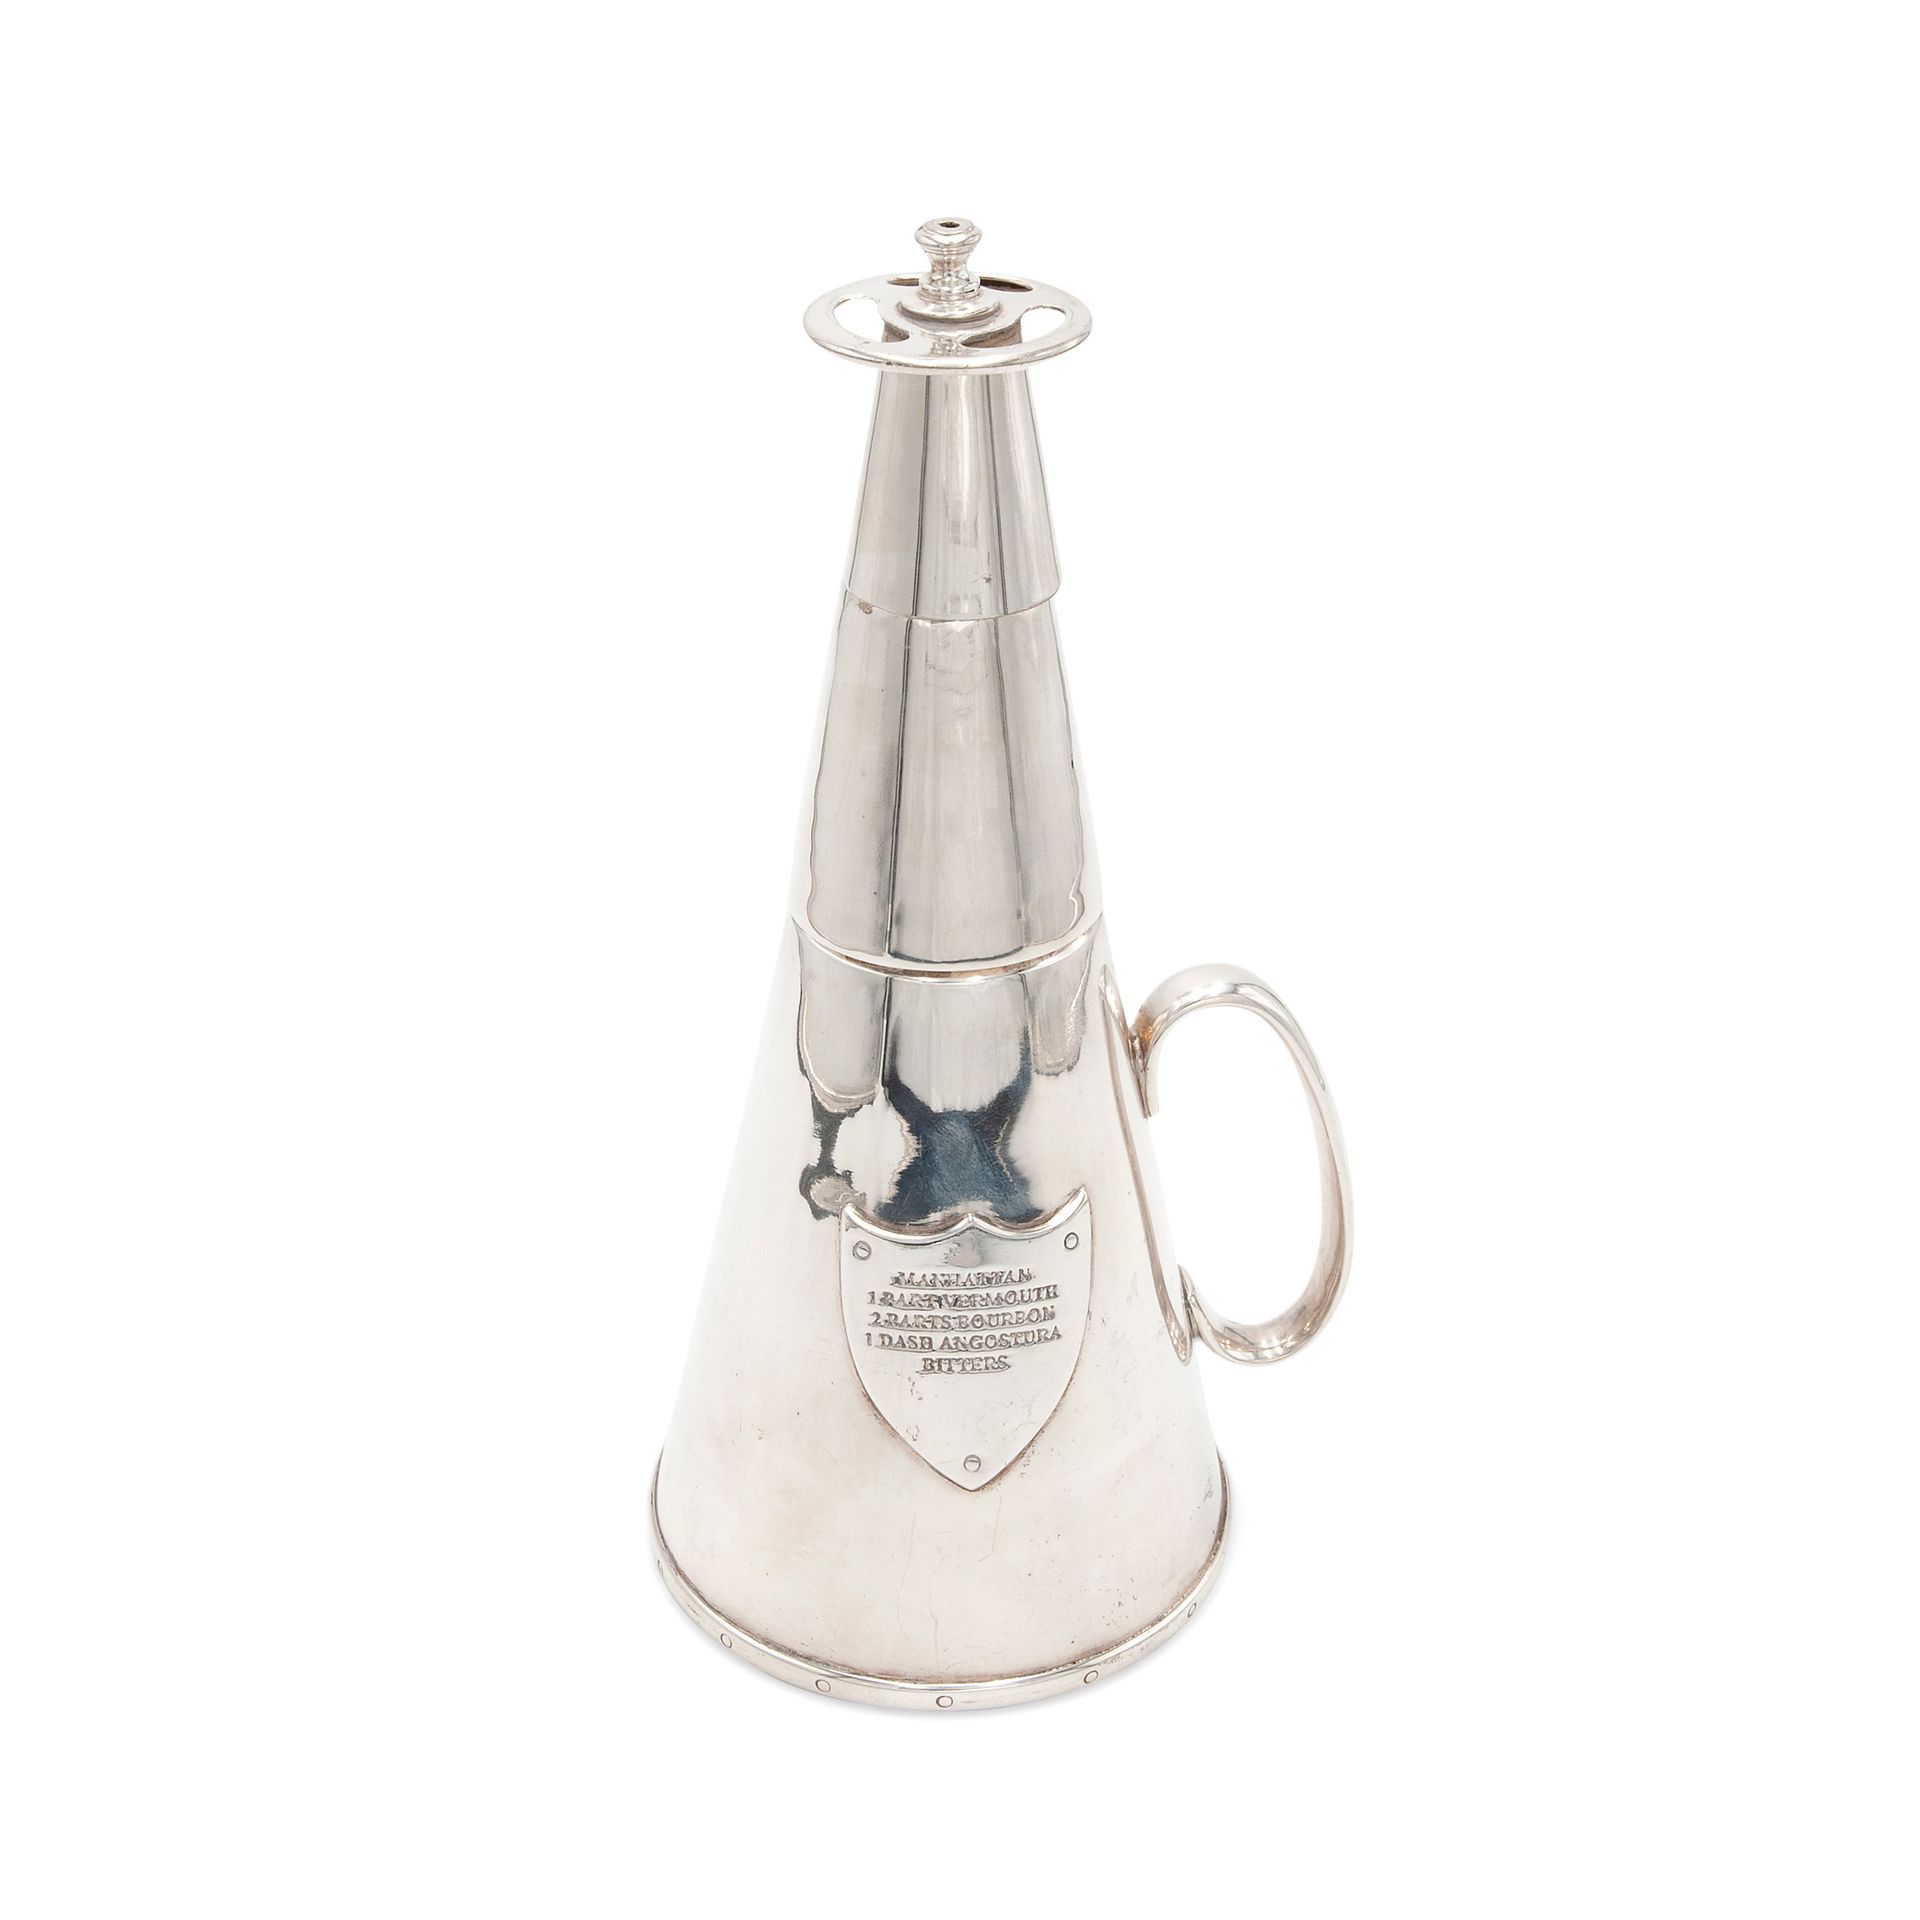 Fire extinguisher-shaped cocktail shaker, circa 1930 Made of chromed metal, the &hellip;